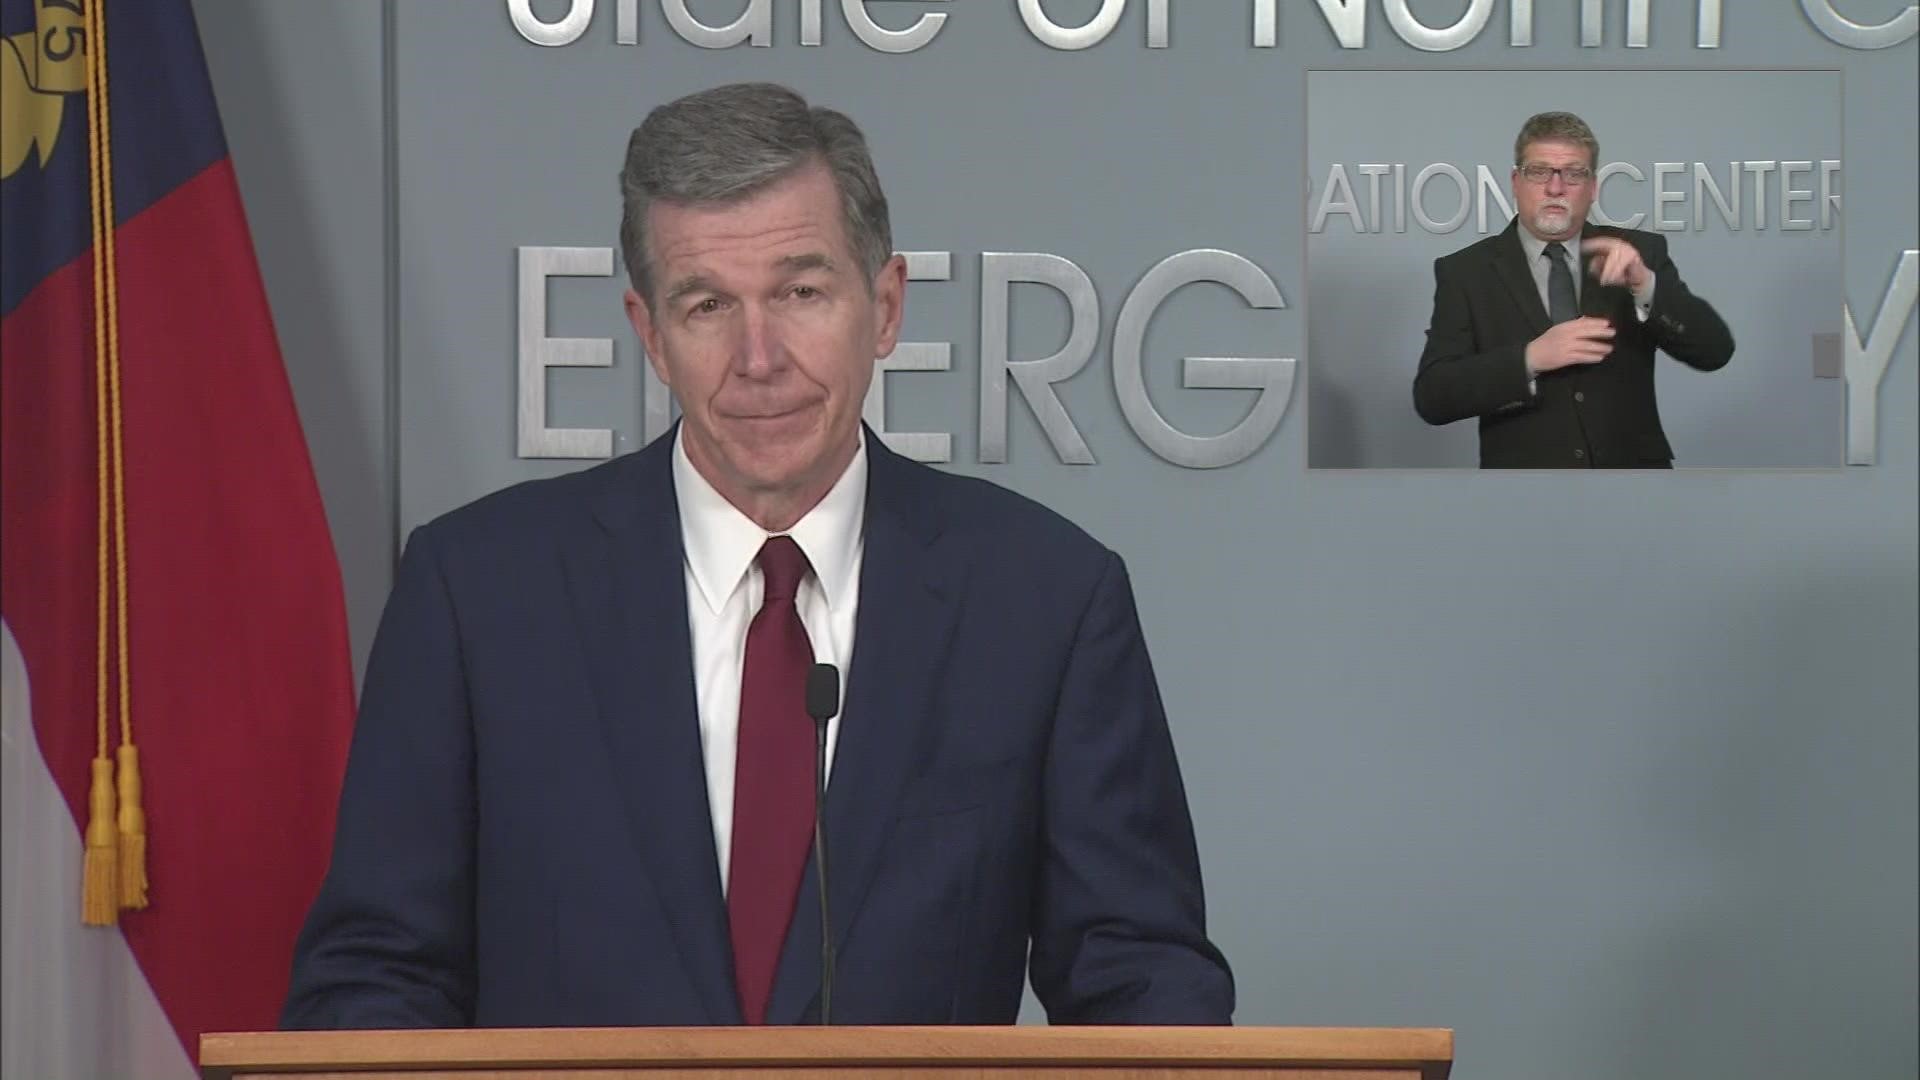 In a news conference Thursday, Gov. Roy Cooper said vaccinations and boosters are the best defense against COVID-19.